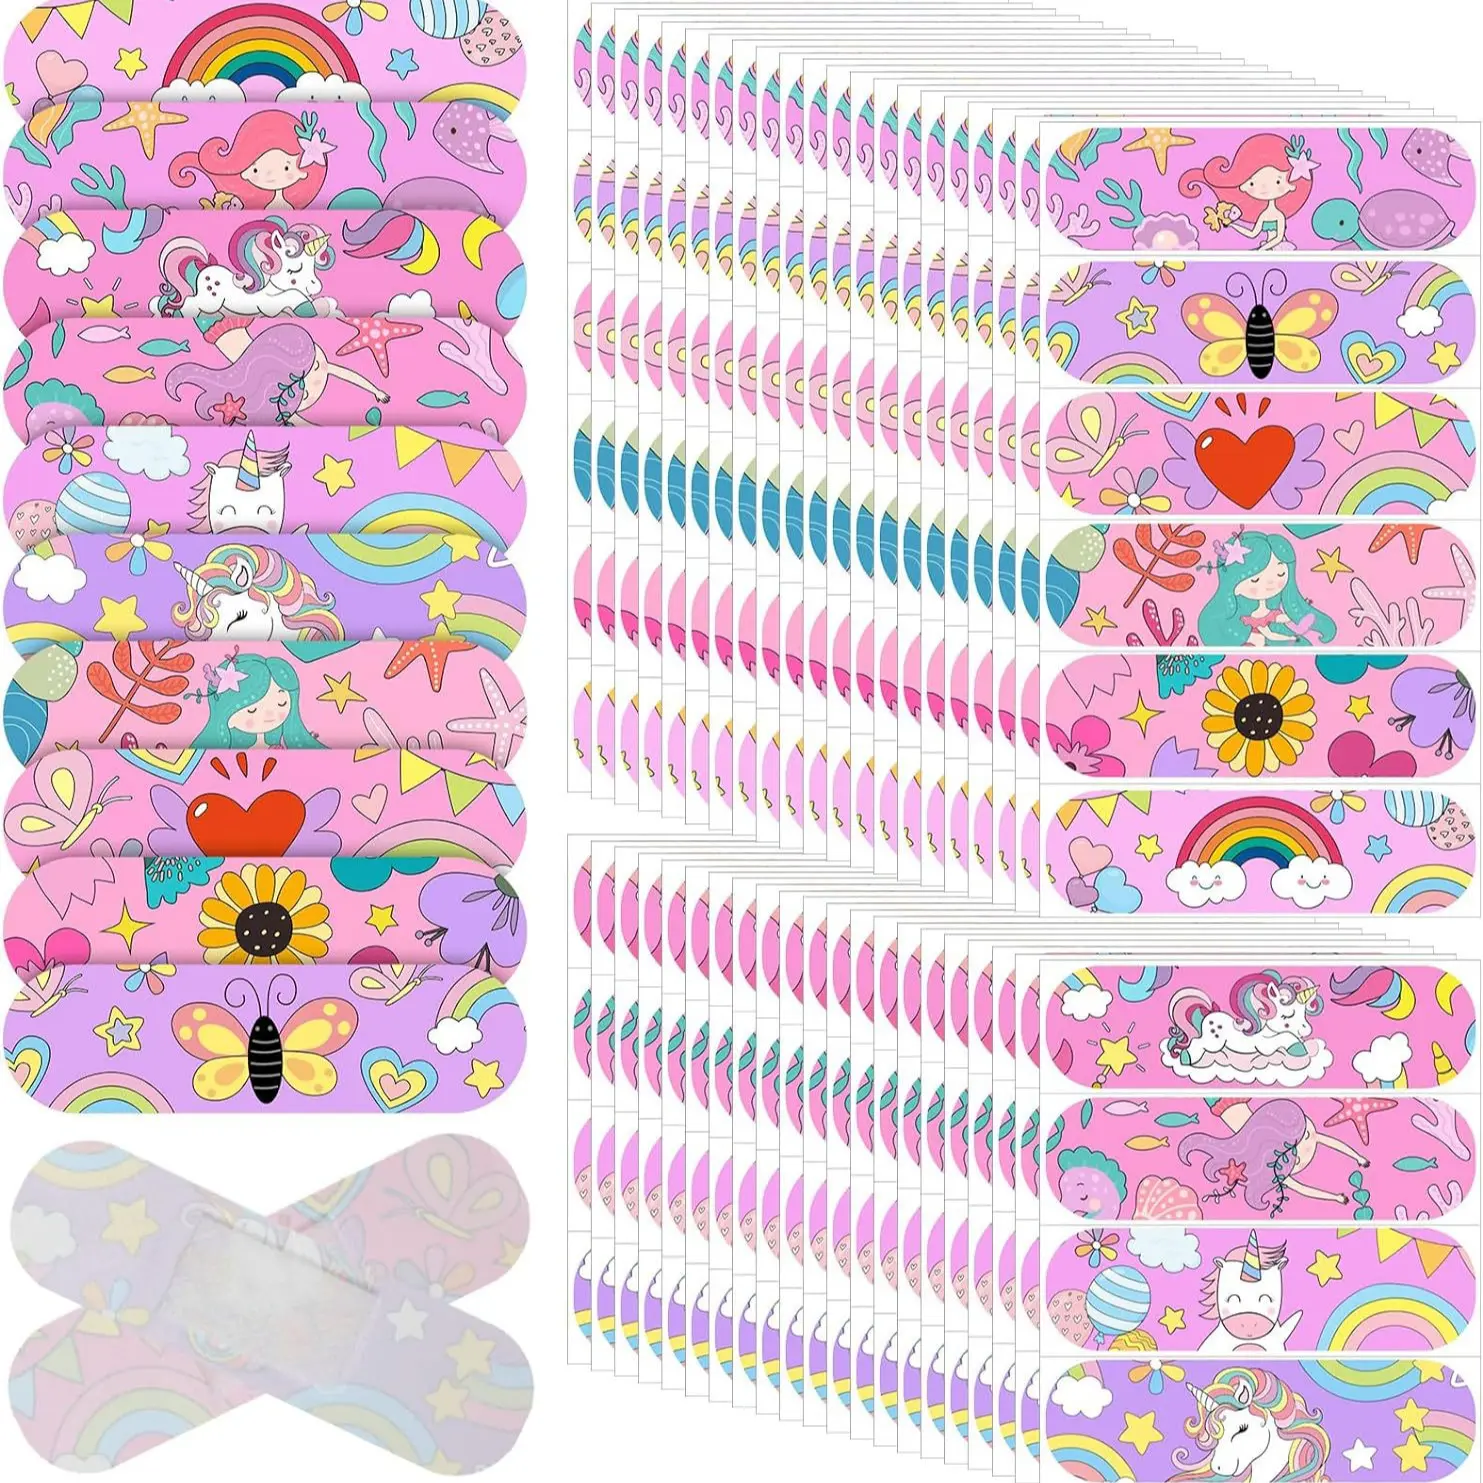 Ovand067 Children's Safety Adhesive Plasters Cartoon Bandage Cute Wound Band-aid Breathable Plaster